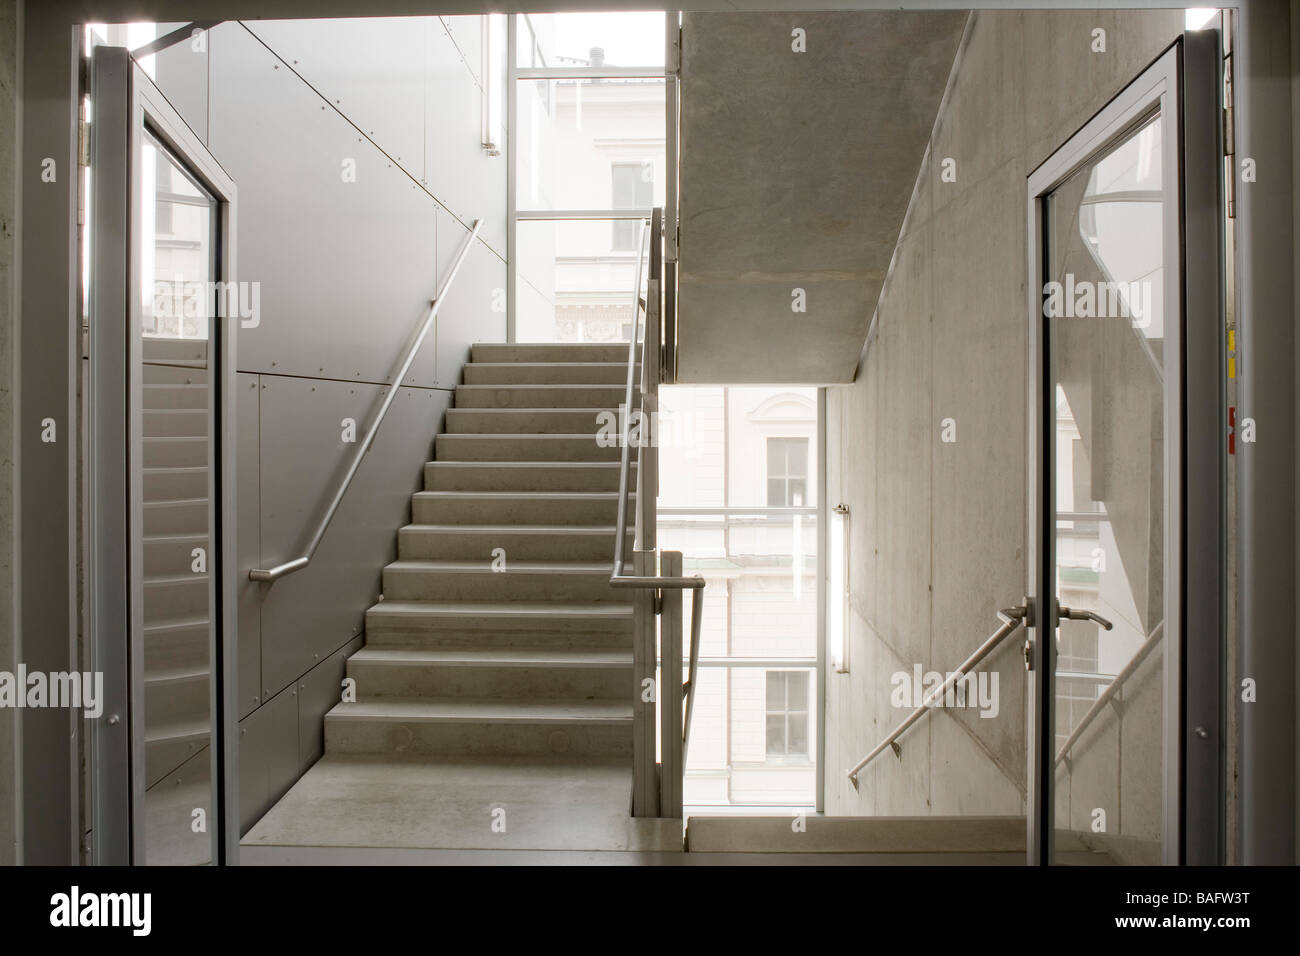 Academia of Fine Arts, Munich, Germany, Coop Himmelb(l)au, Academia of fine arts fire escape. Stock Photo